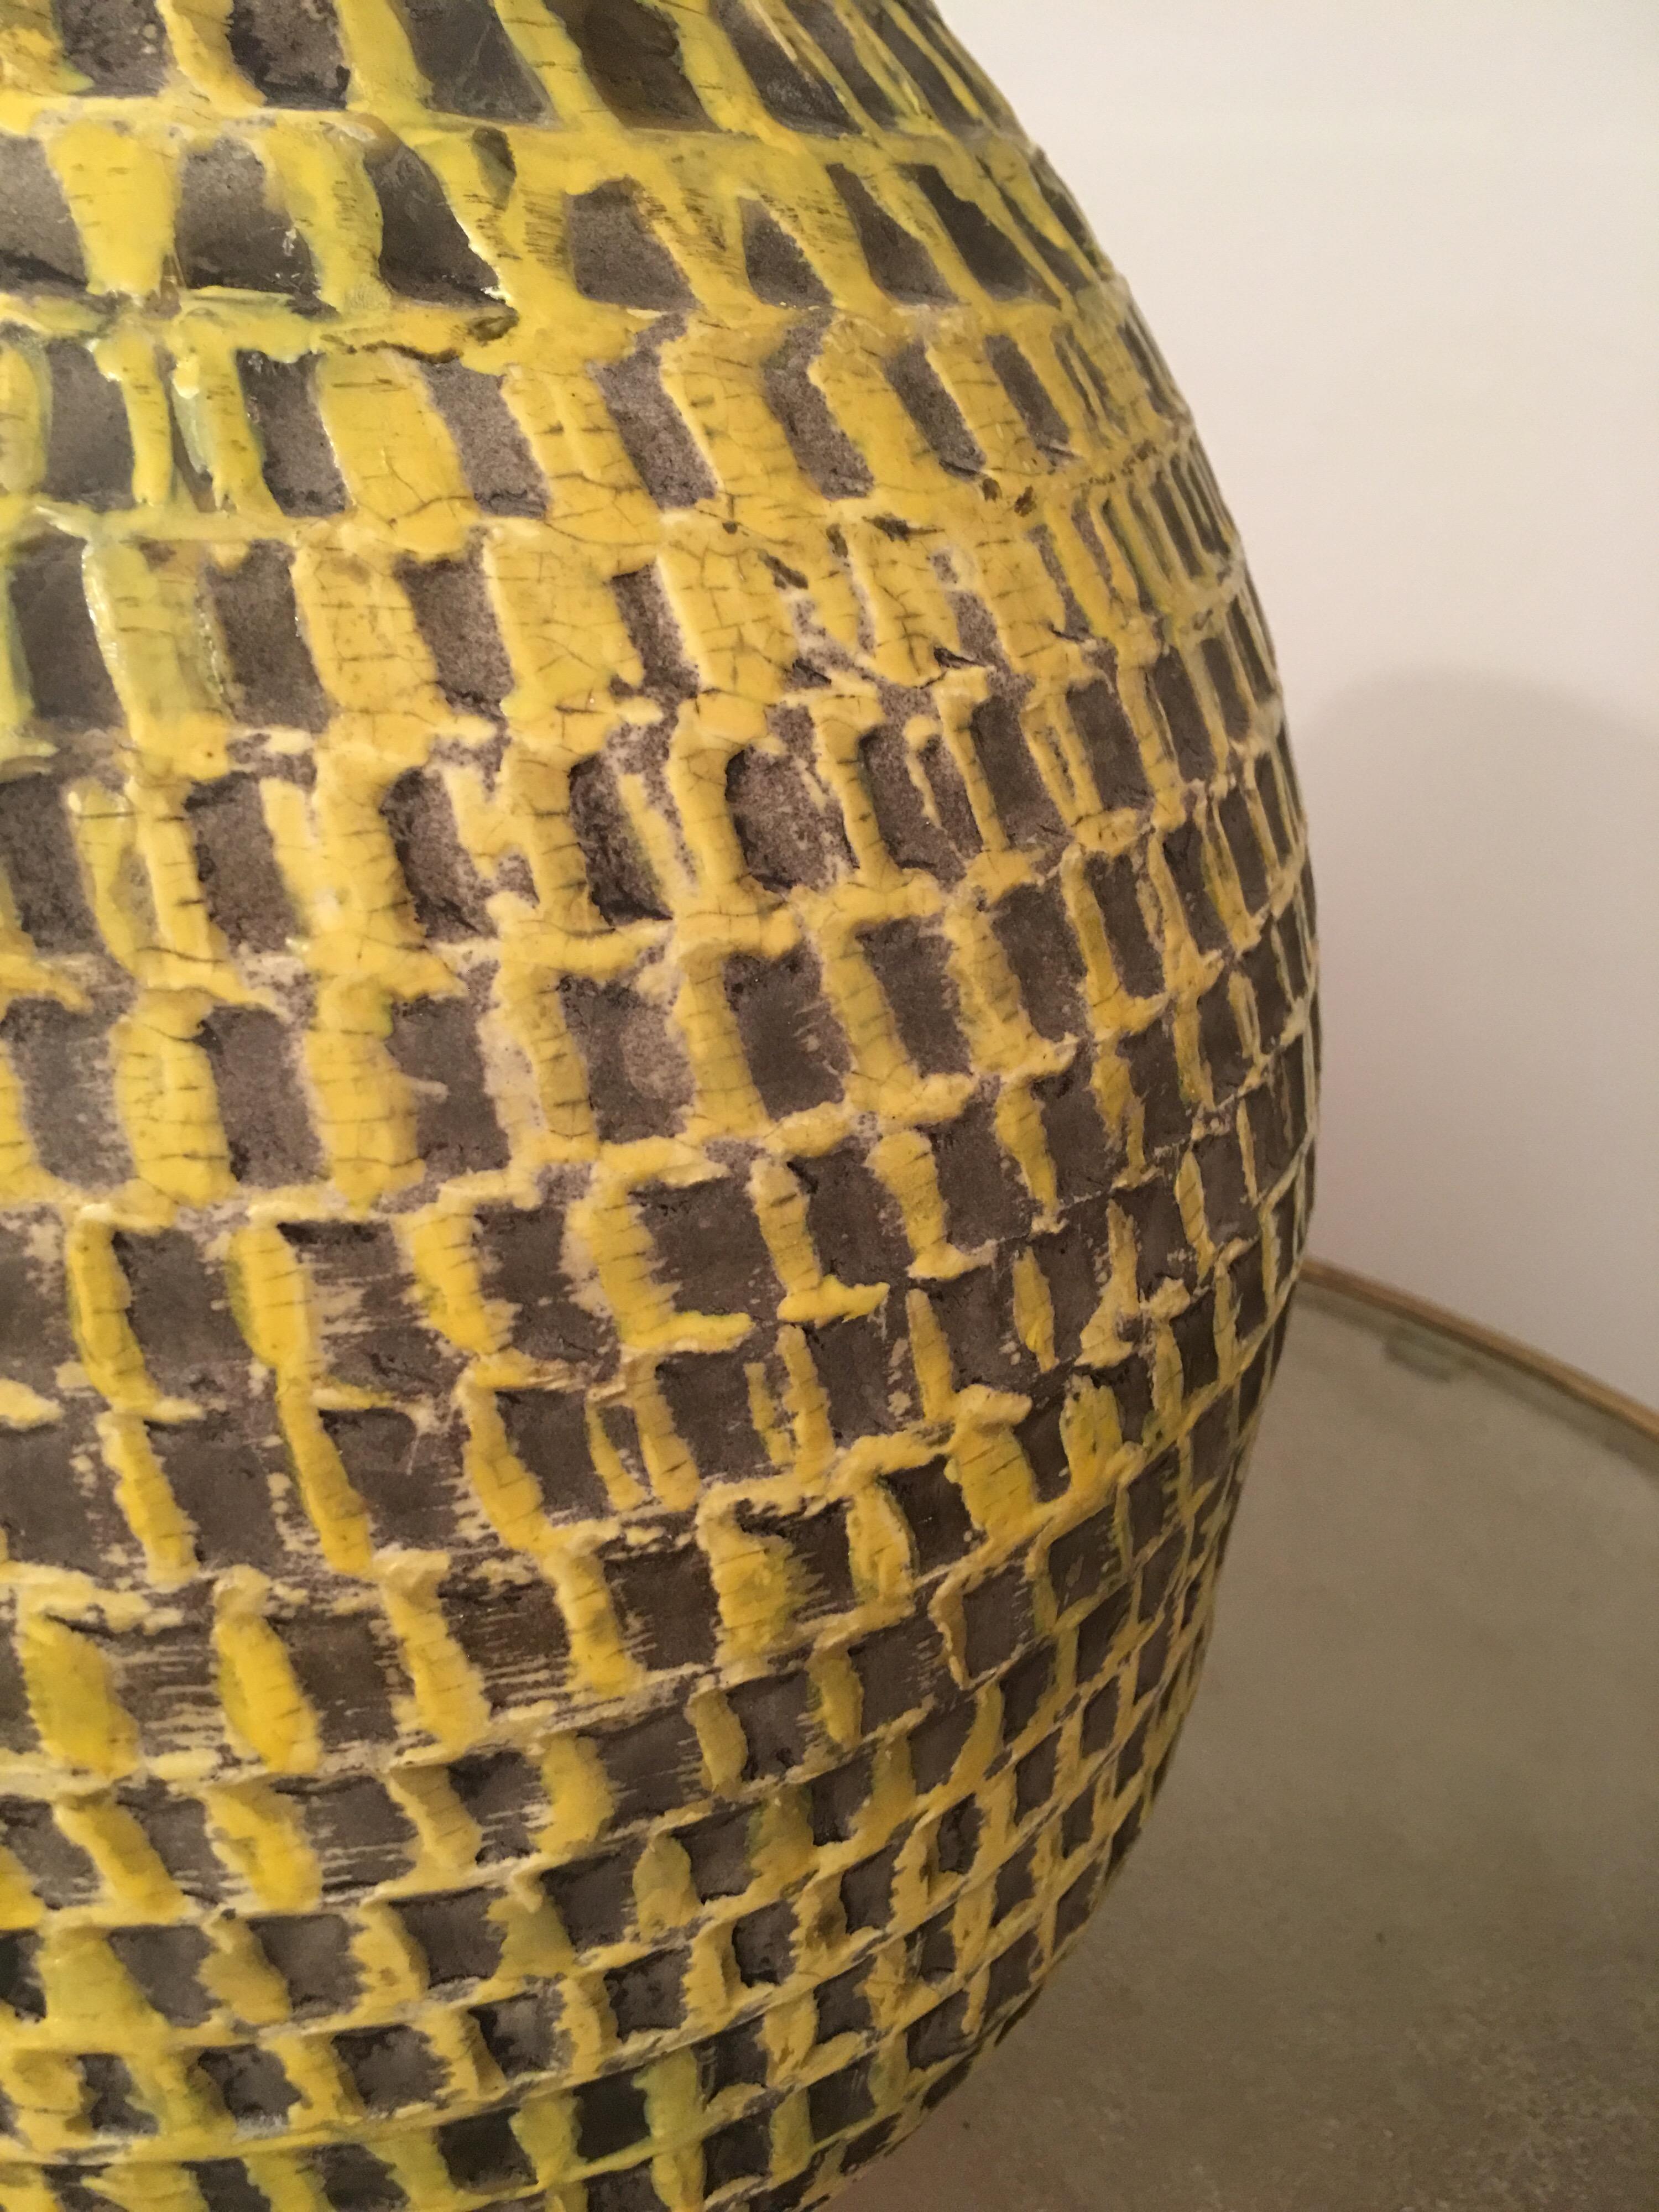 Jean Besnard Signed Large Yellow Ceramic Vase, Incised Decor, French, 1930s For Sale 4